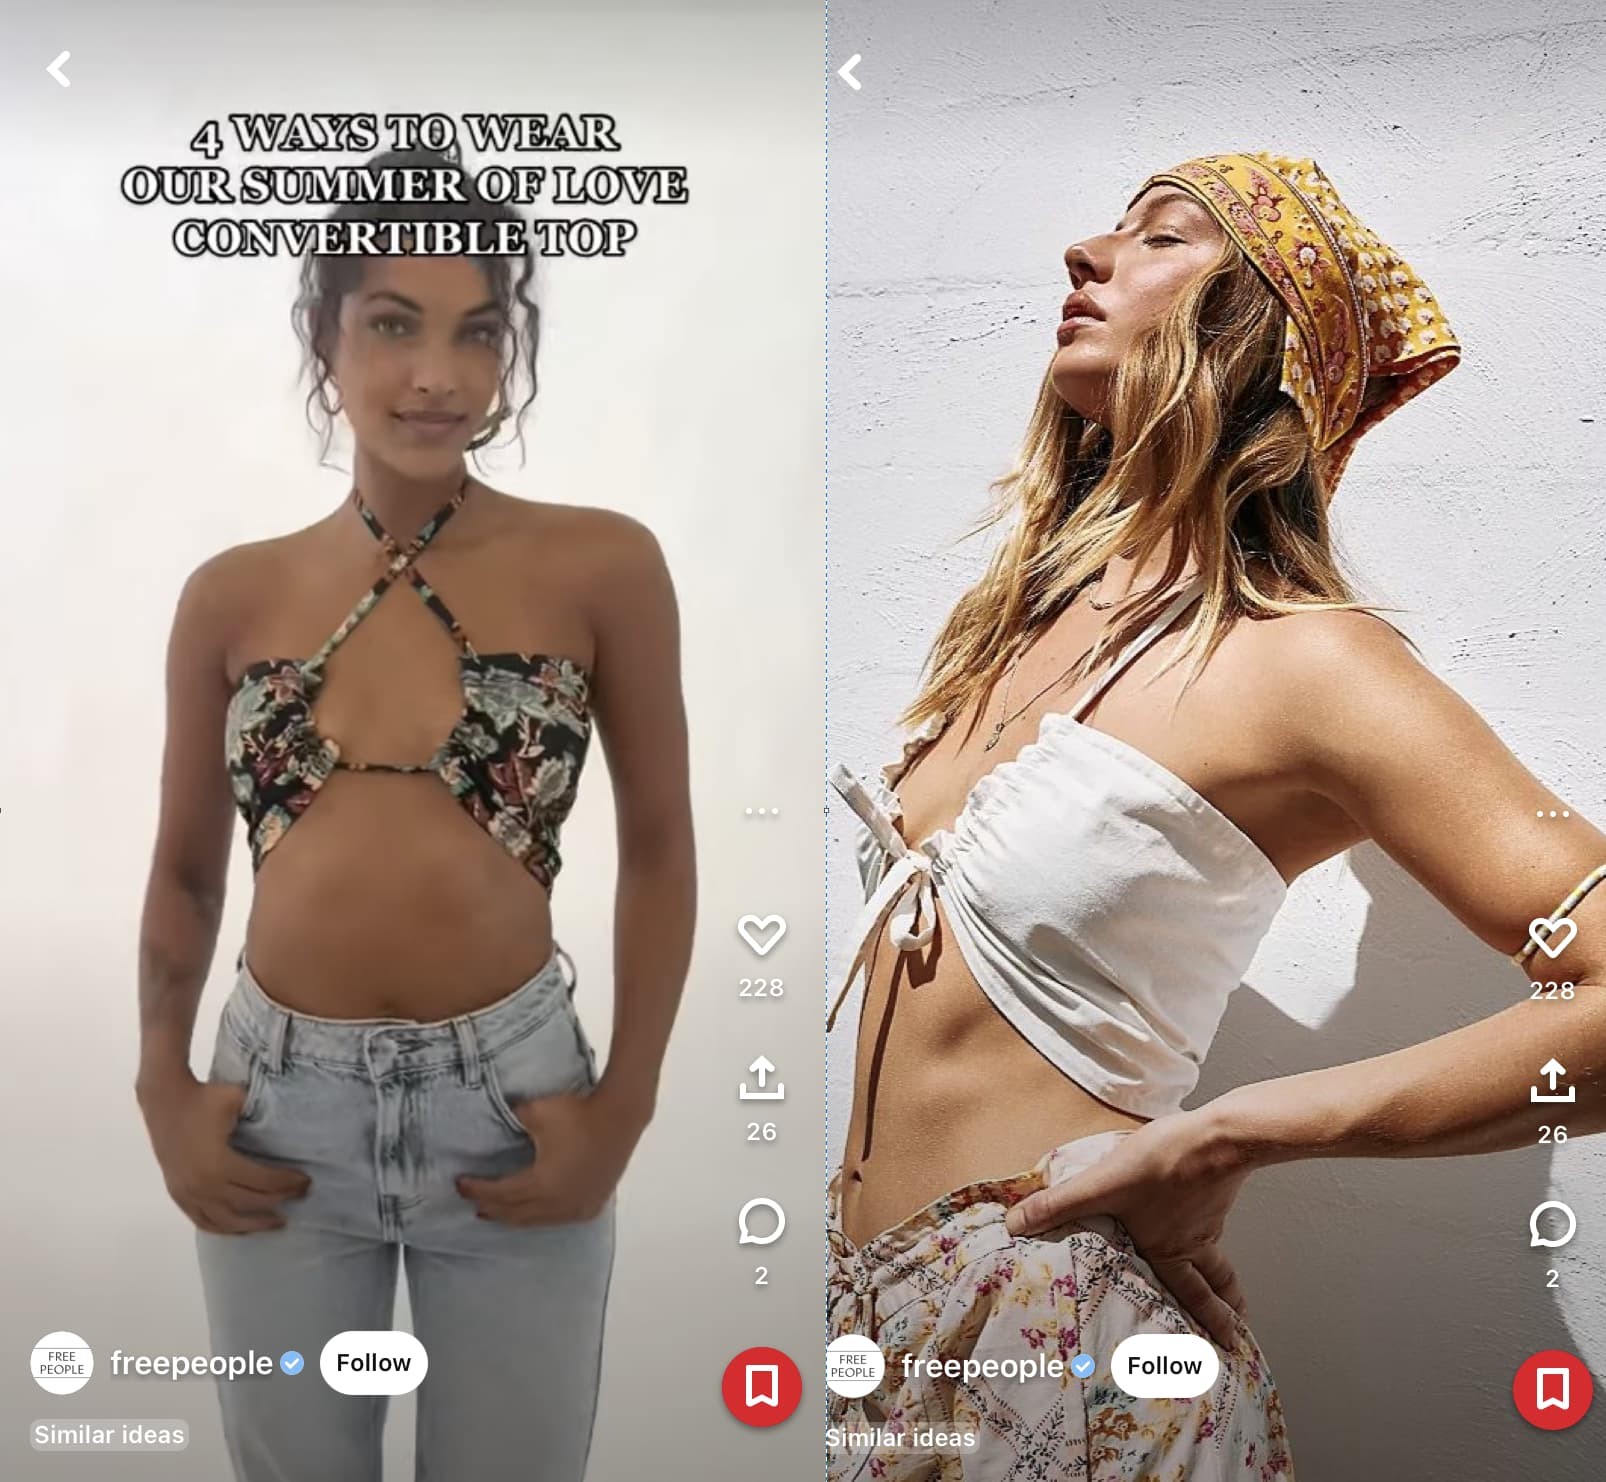 Free People uses Pinterest Idea Pins for marketing